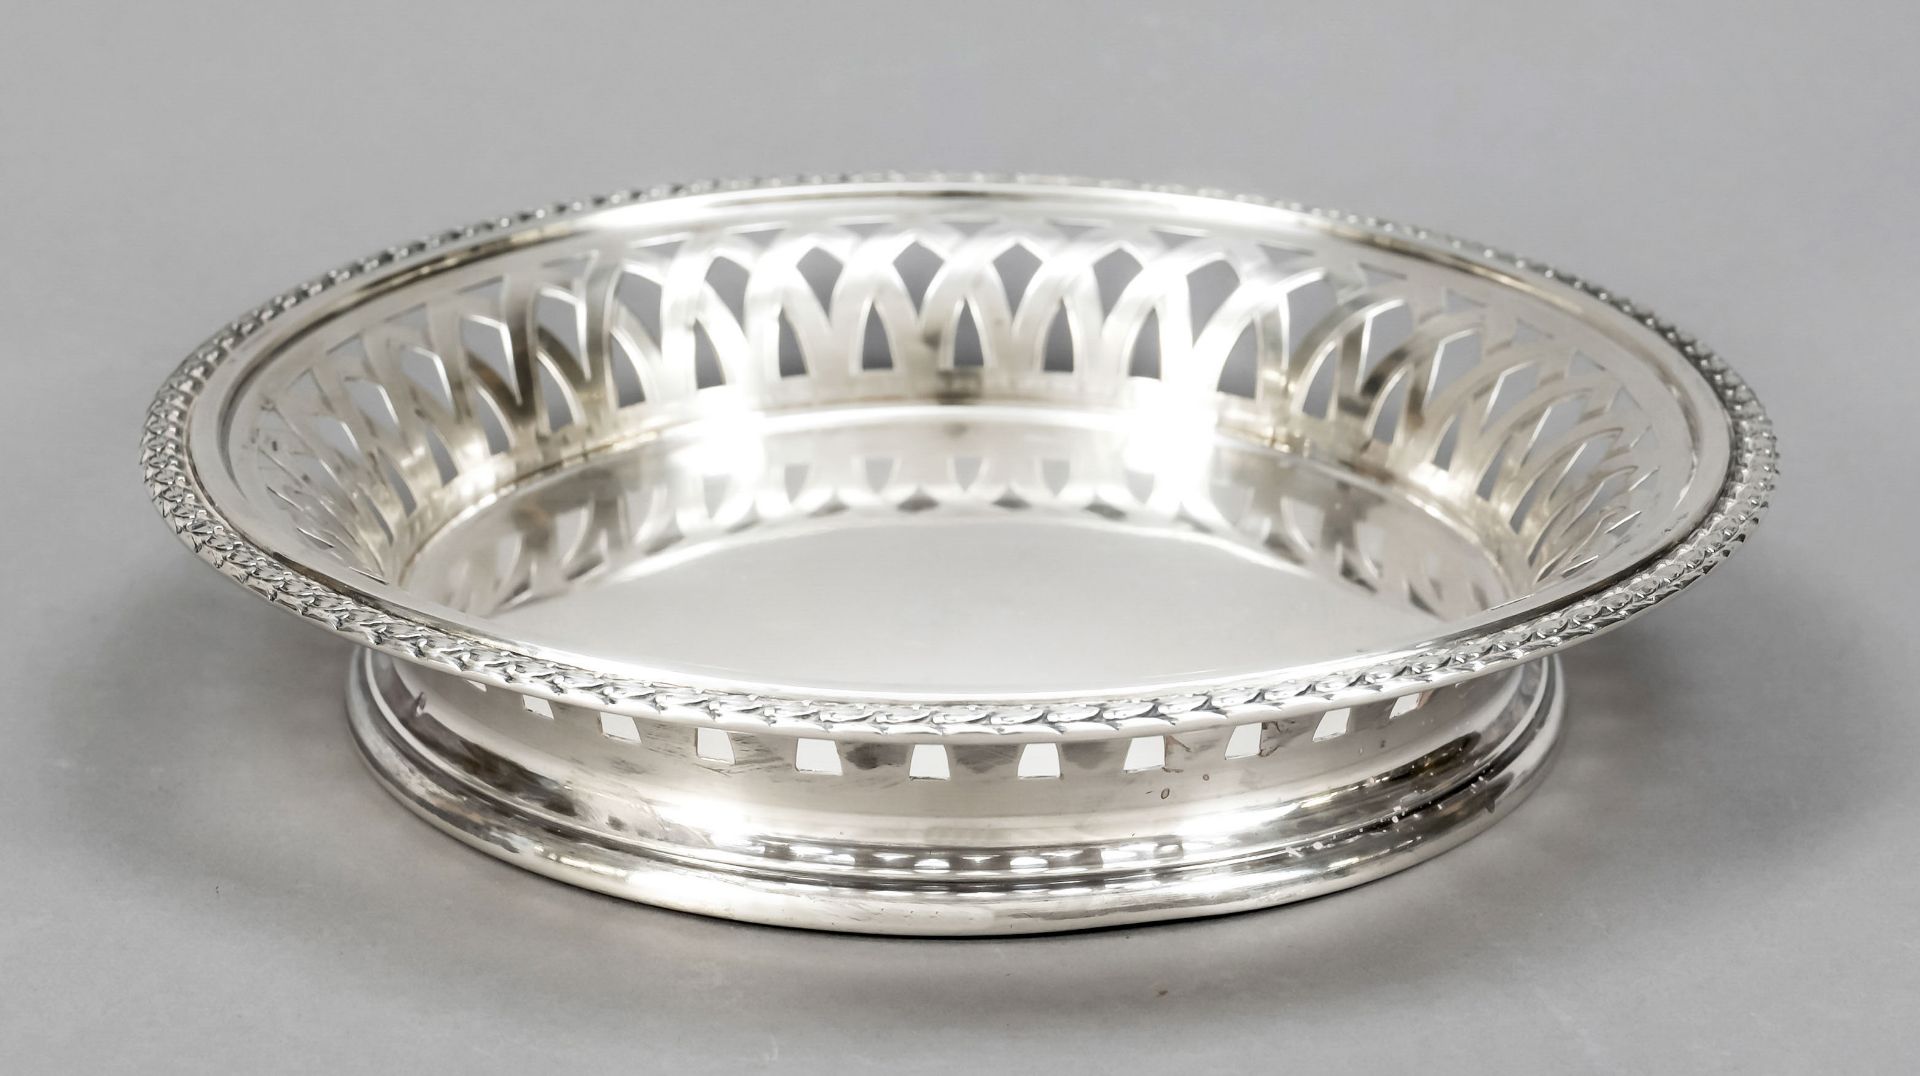 Round wicker bowl, France, early 20th century, silver 950/000, on round stepped stand, flat body